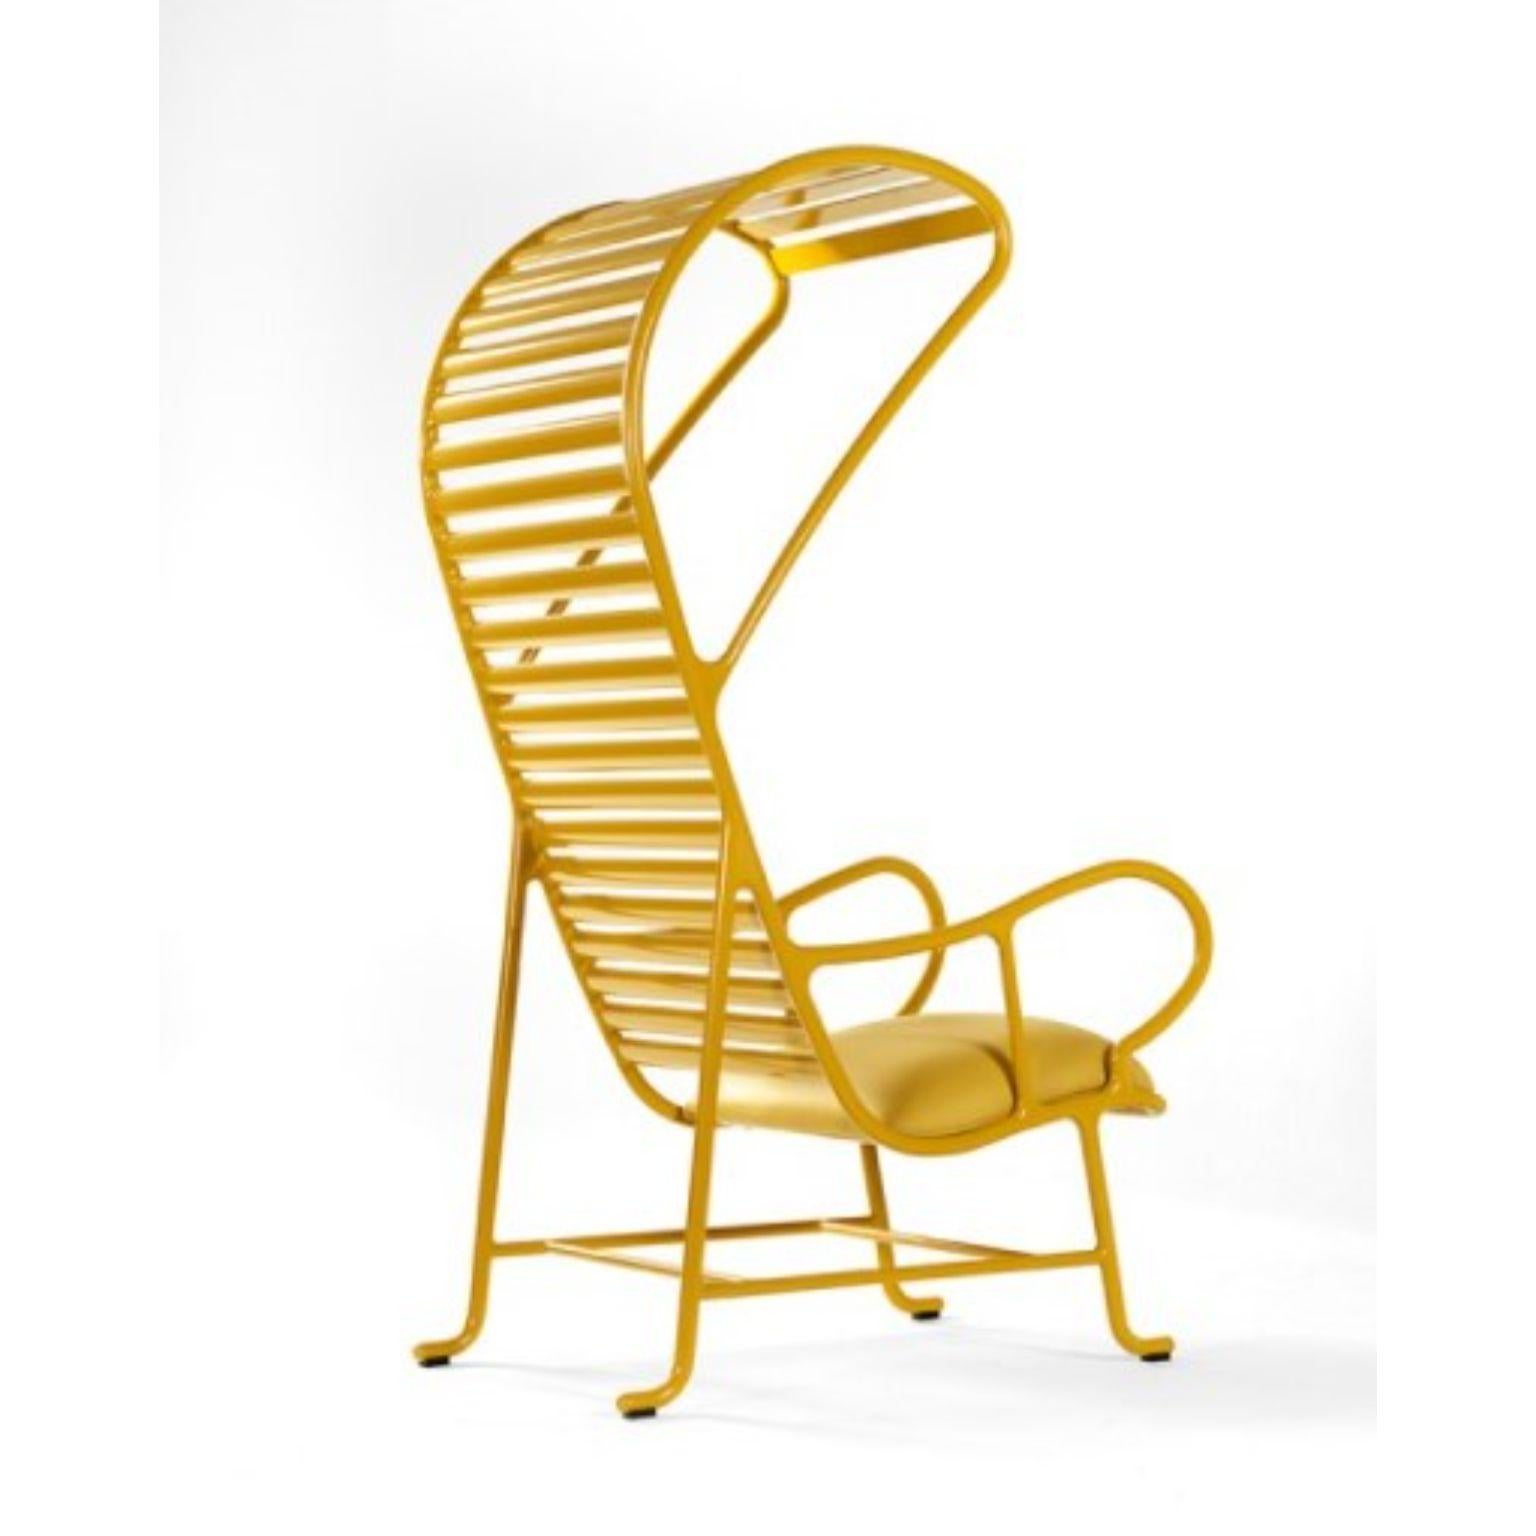 Outdoor gardenia yellow armchair with cover by Jaime Hayon 
Dimensions: D 89 x W 70 x H 166 cm 
Materials: Structure in cast aluminum and laminates in extruded aluminum. Powder coating in Alesta Anodic Black or in high-gloss yellow (RAL 1005).